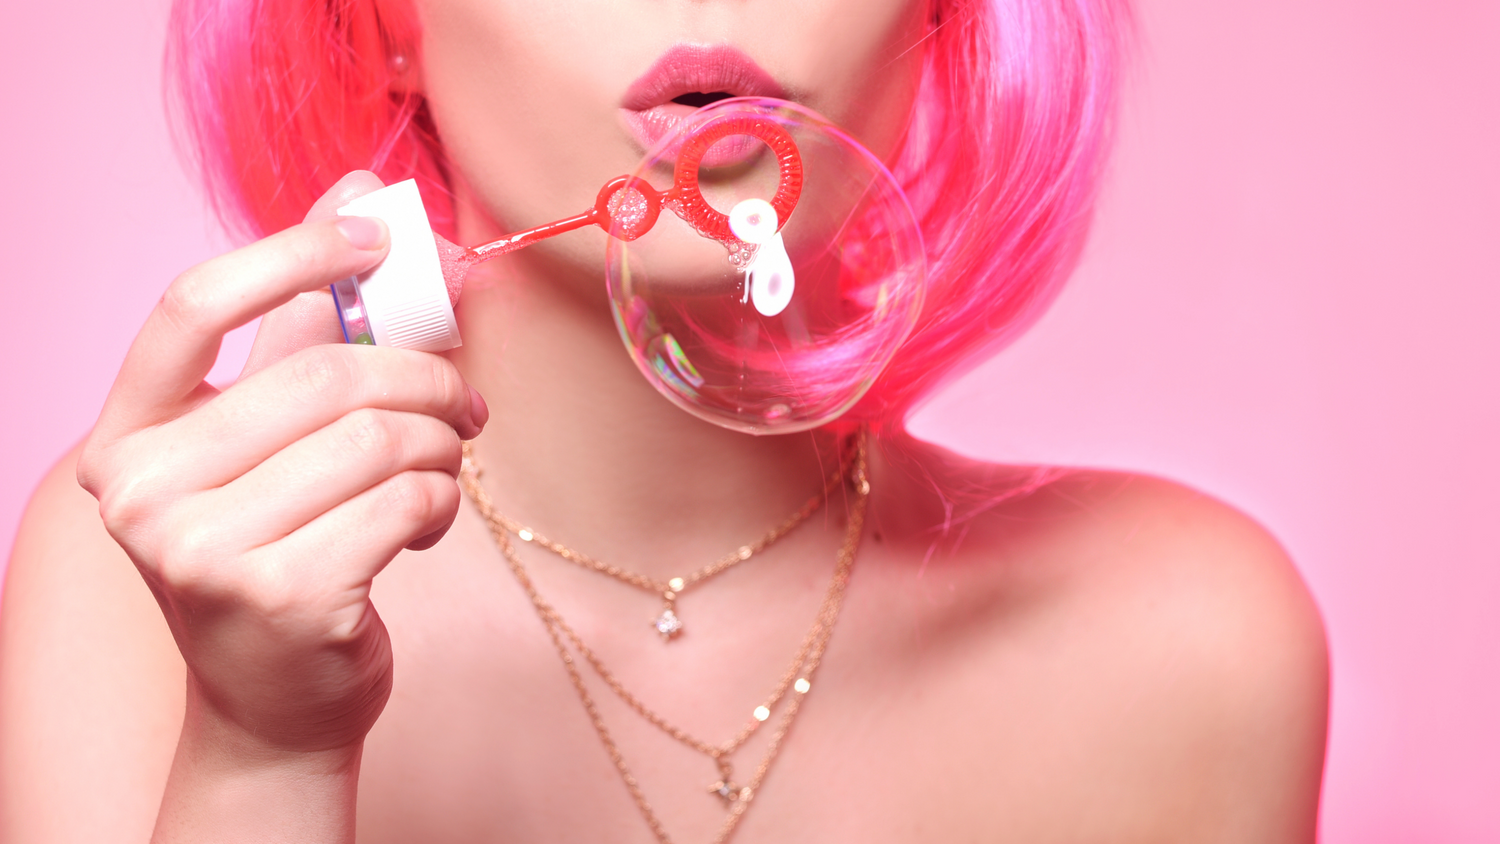 The #1 cruelty free and vegan beauty box. model with pink hair blowing bubbles 